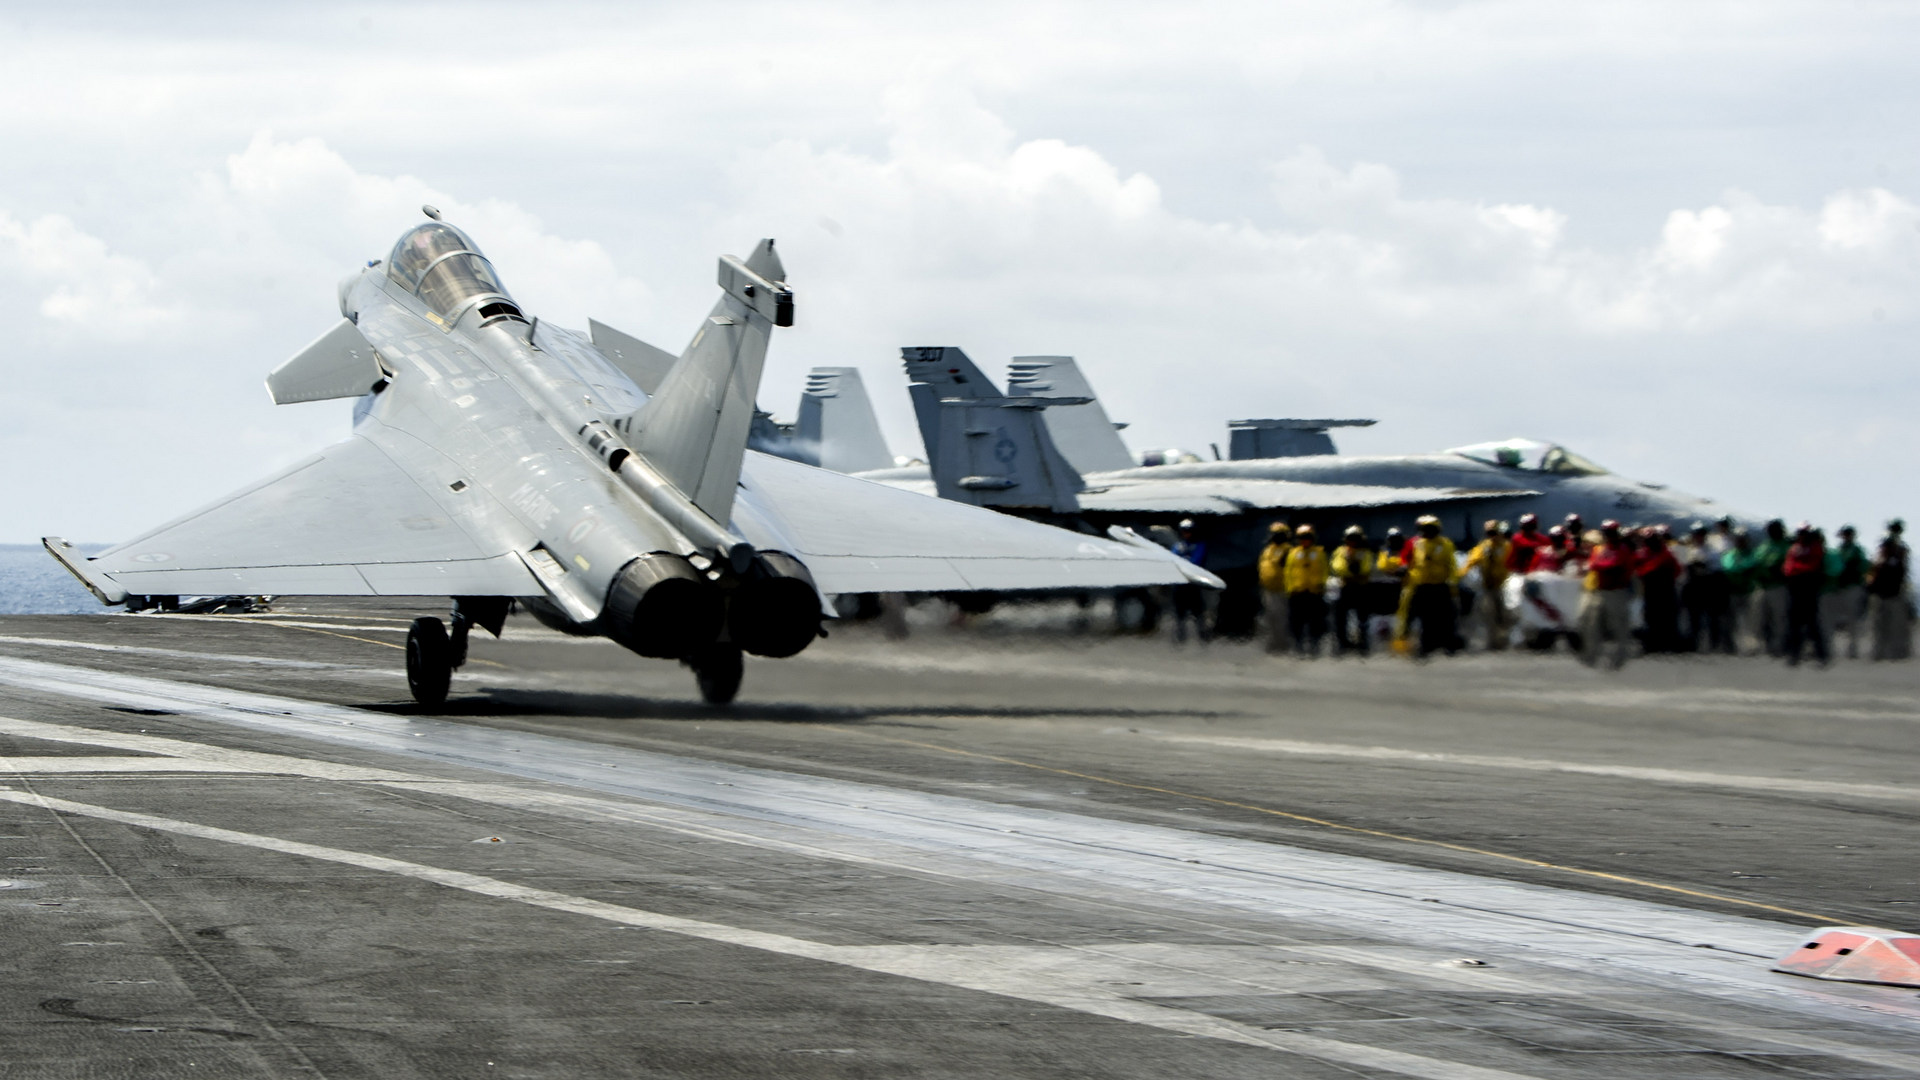 Atlantic Ocean (July 3, 2018) A French Dassault Rafale M Fighter lands on the flight deck of the Nimitz-class aircraft carrier USS Harry S. Truman (CVN 75). Harry S. Truman is deployed as part of an ongoing rotation of U.S. forces supporting maritime security operations in international waters around the globe -- U.S. Navy photo by Mass Communication Specialist 3rd Class Rebekah A. Watkins.